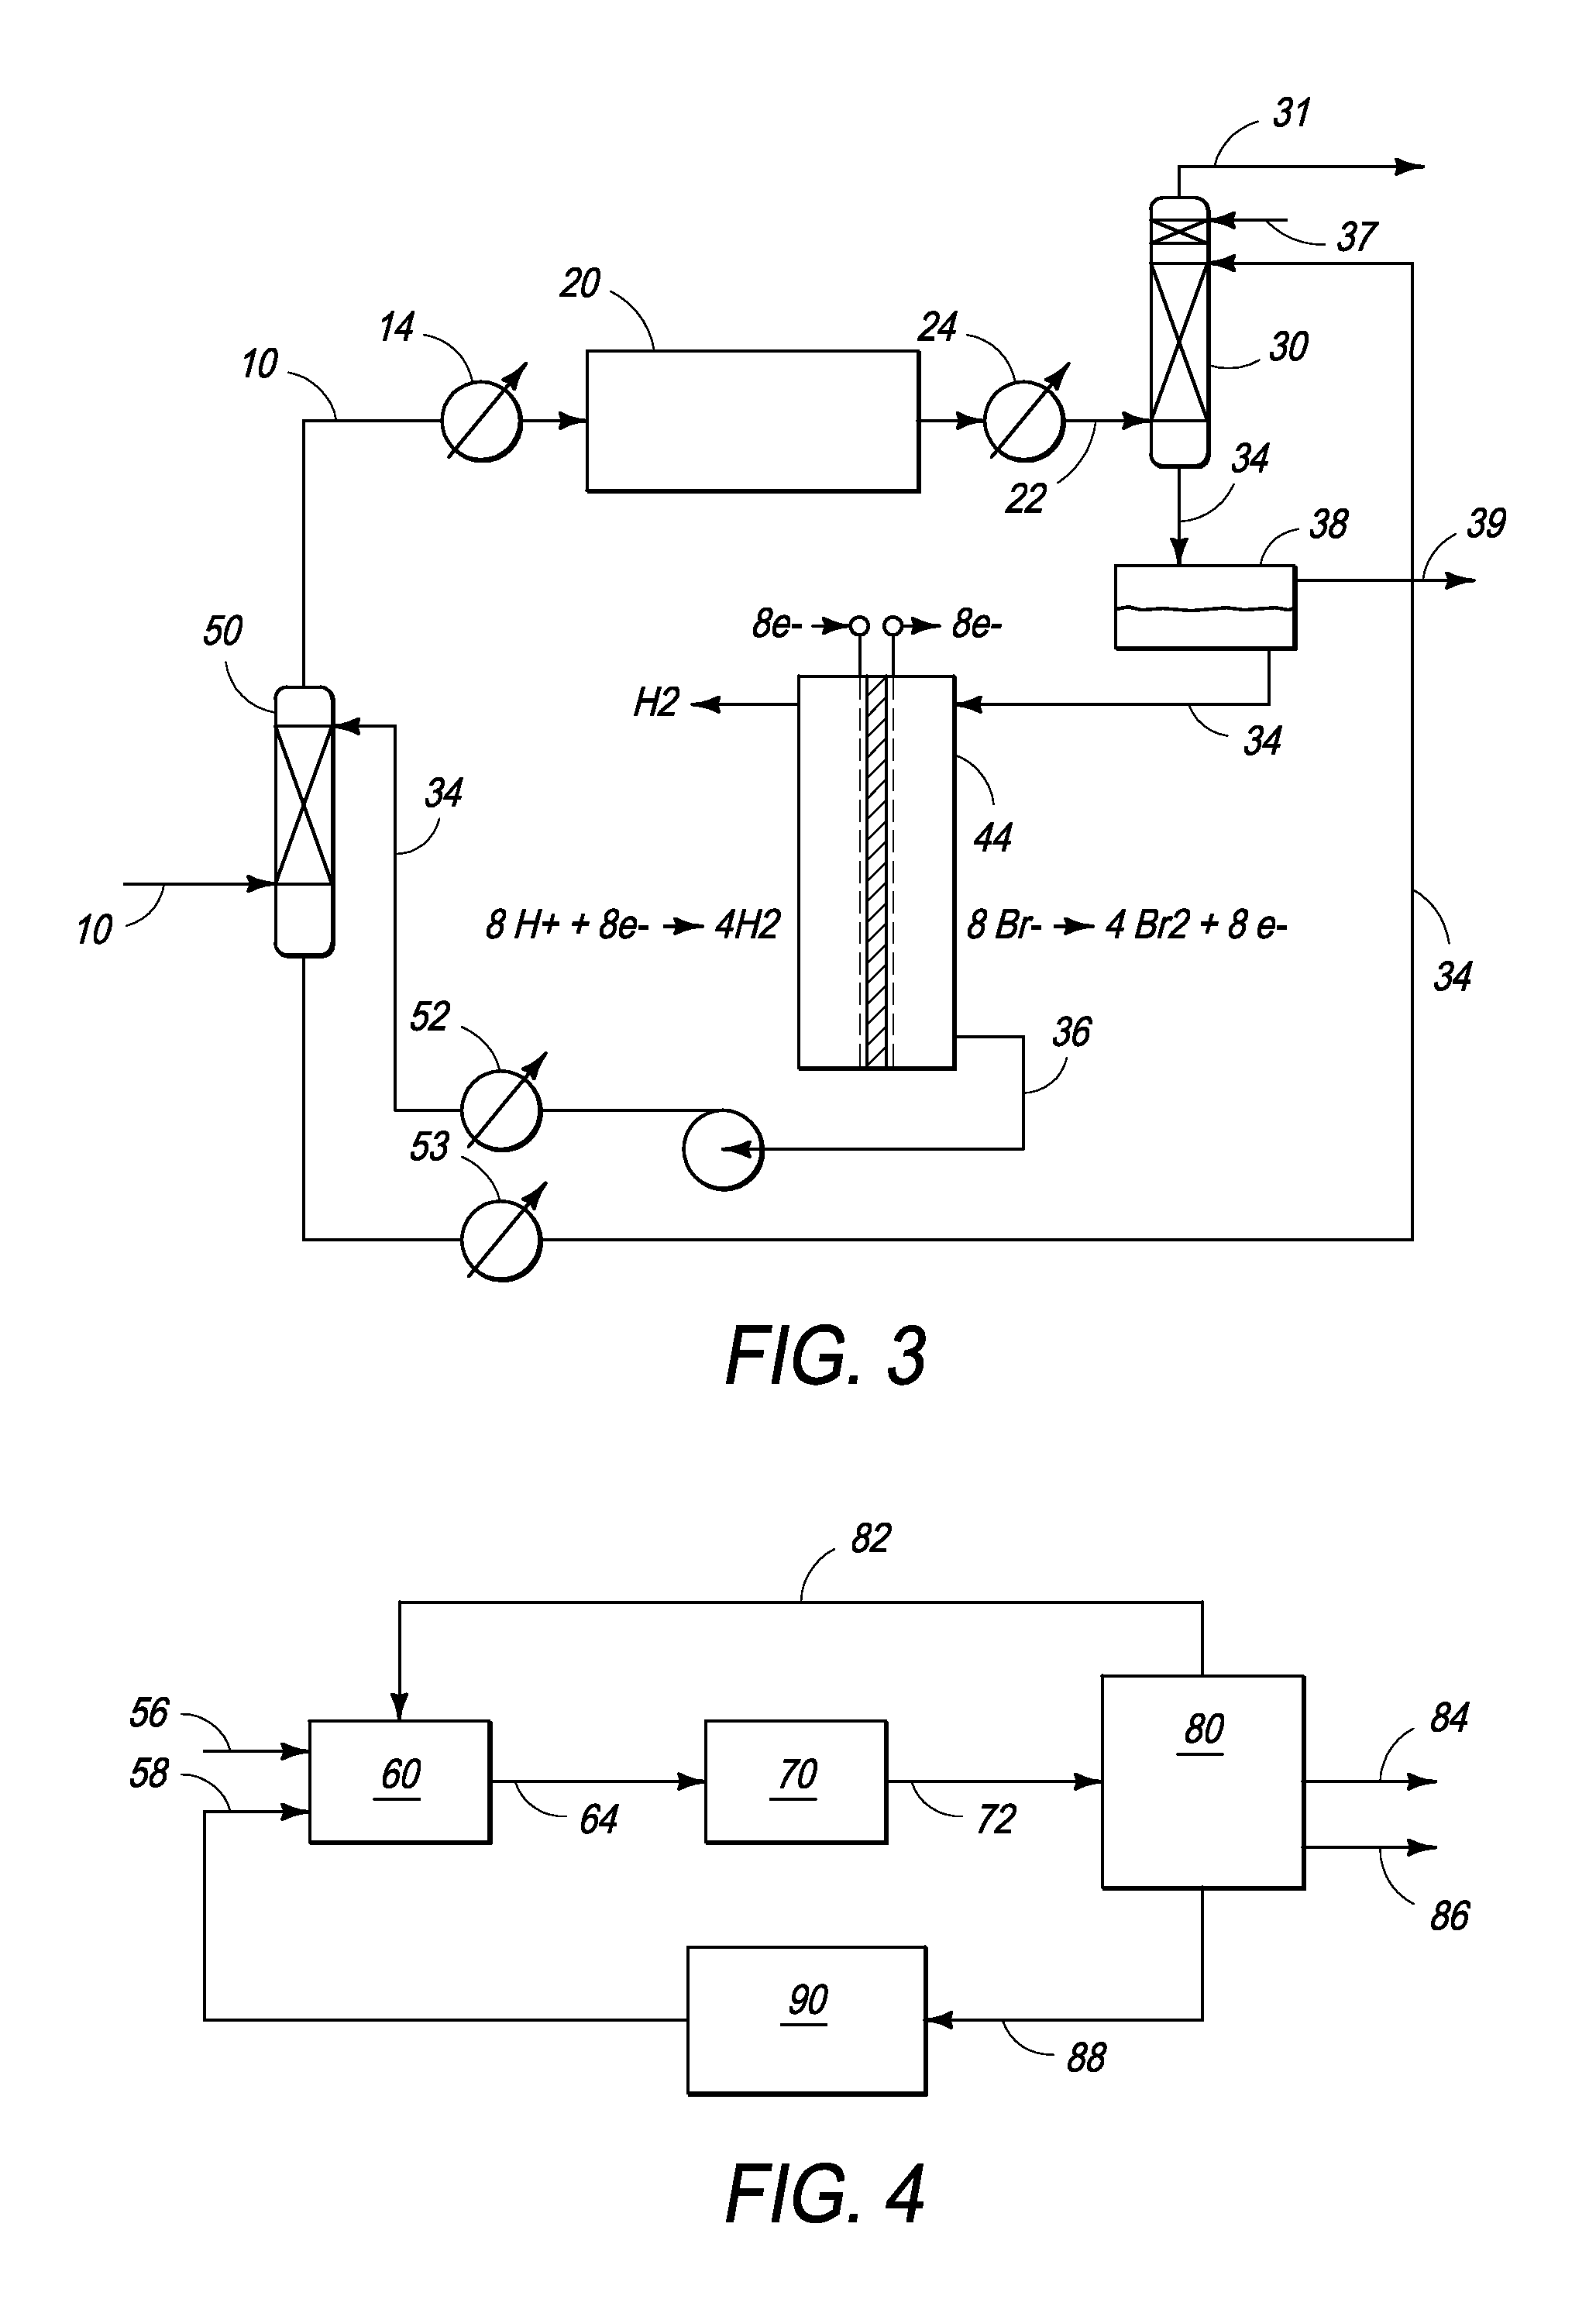 Processes for converting hydrogen sulfide to carbon disulfide